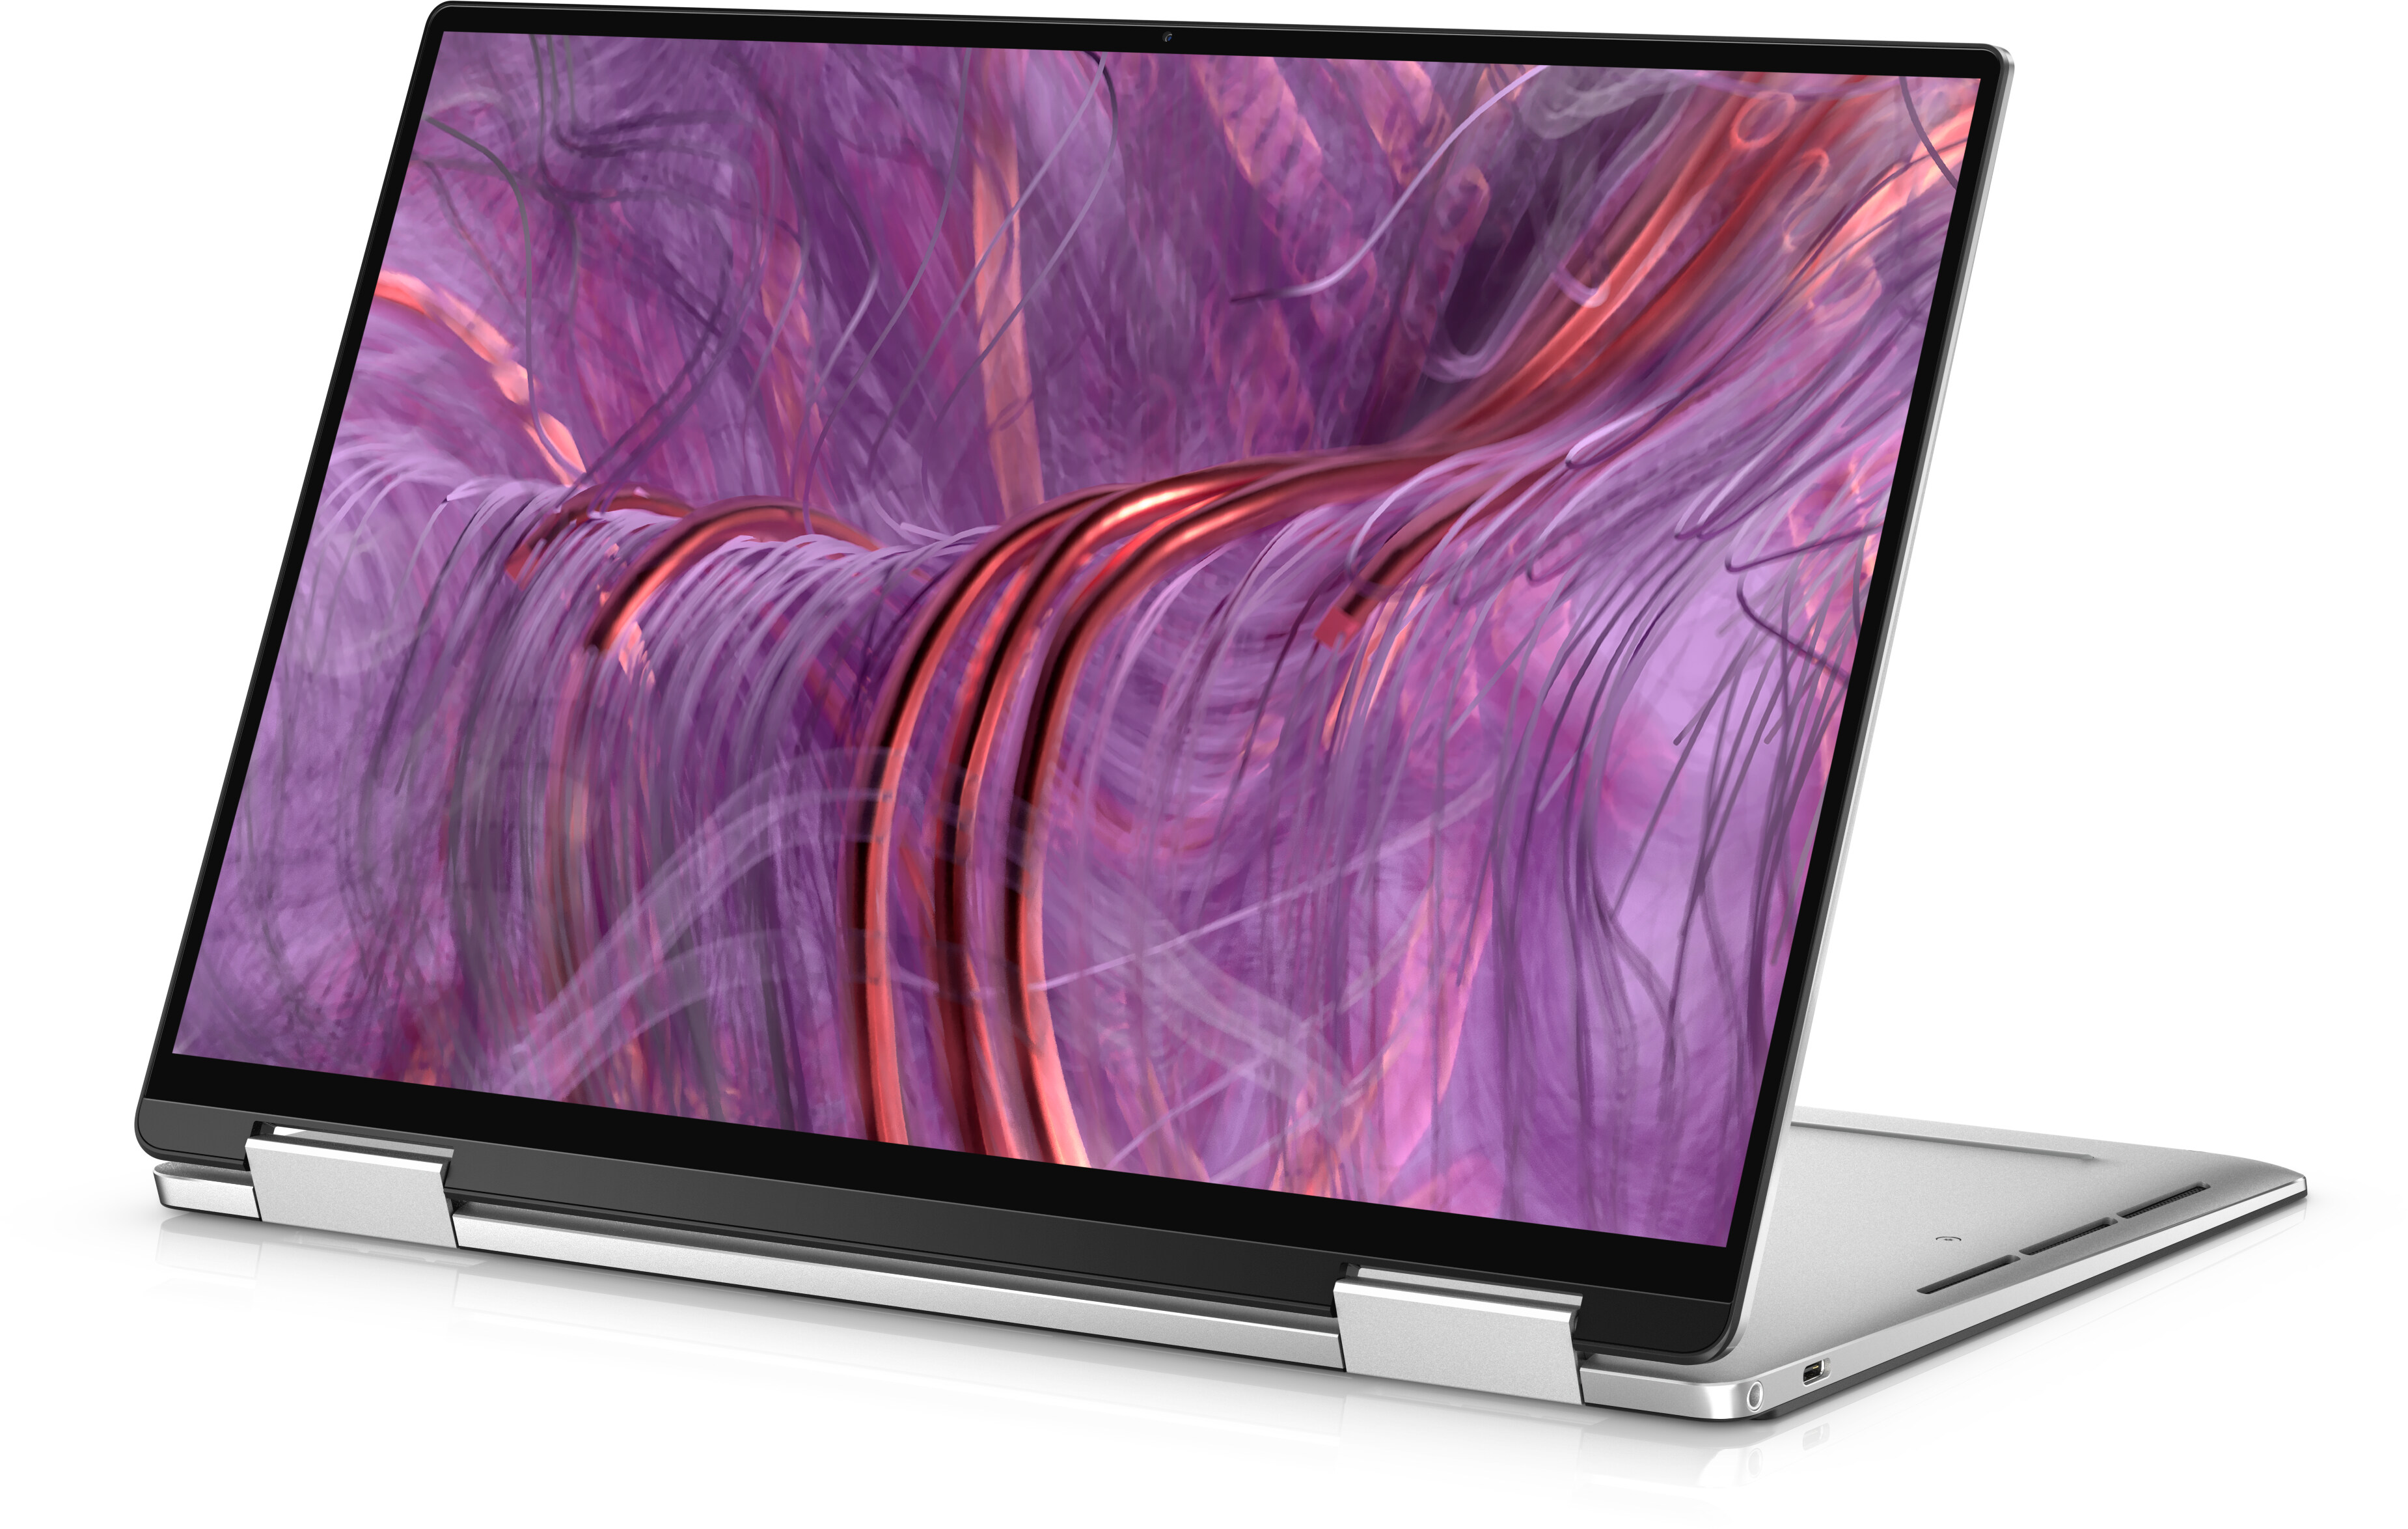 Dell XPS 13 2-in-1 Laptop | Dell USA